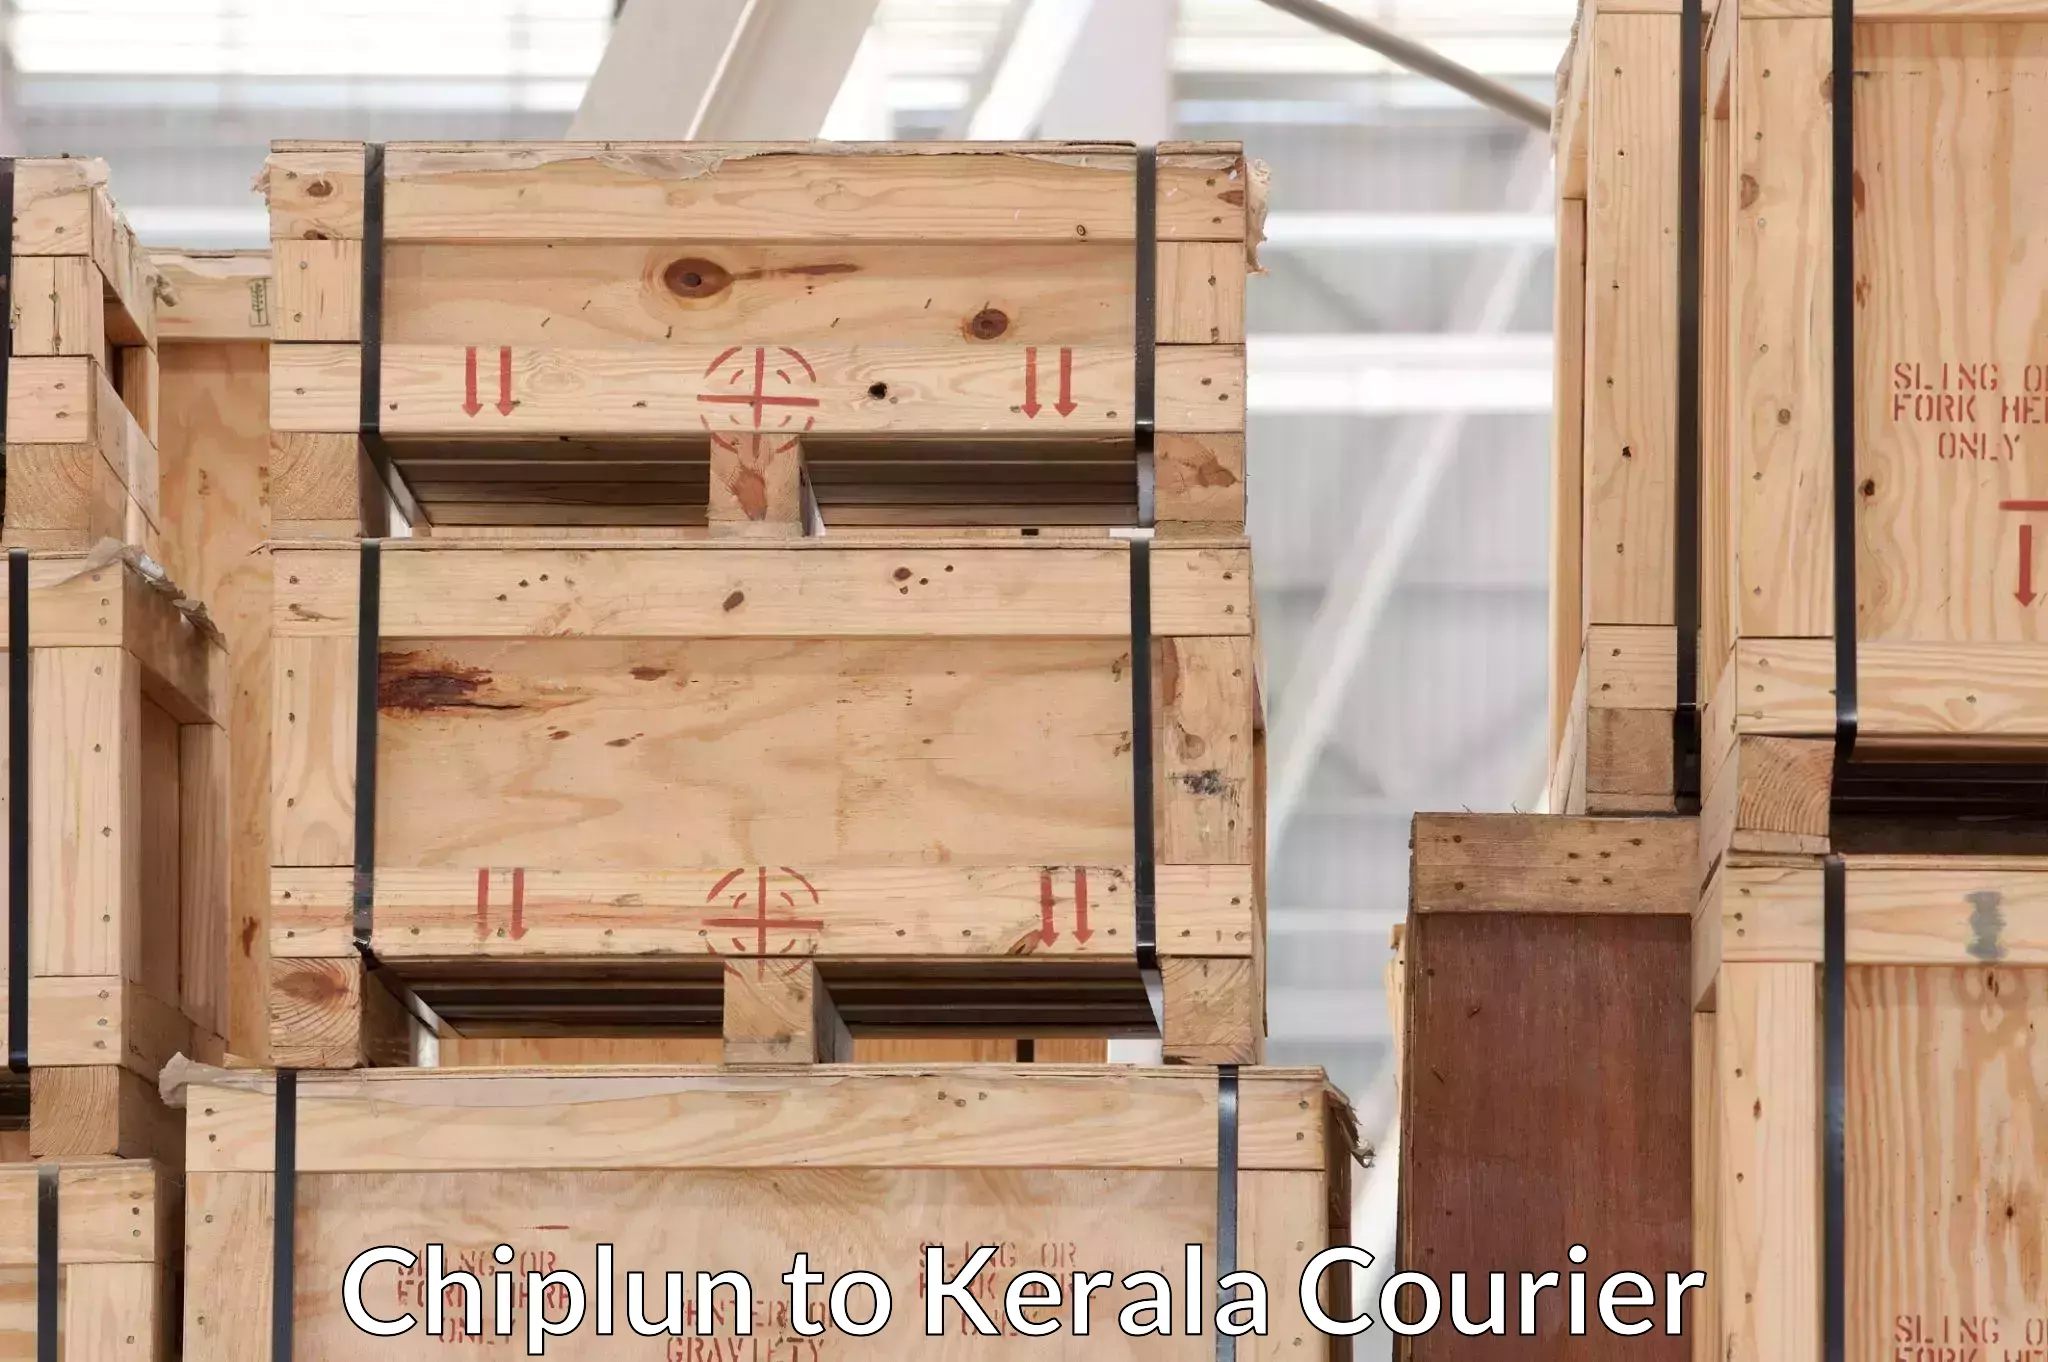 Professional packing services Chiplun to Kerala